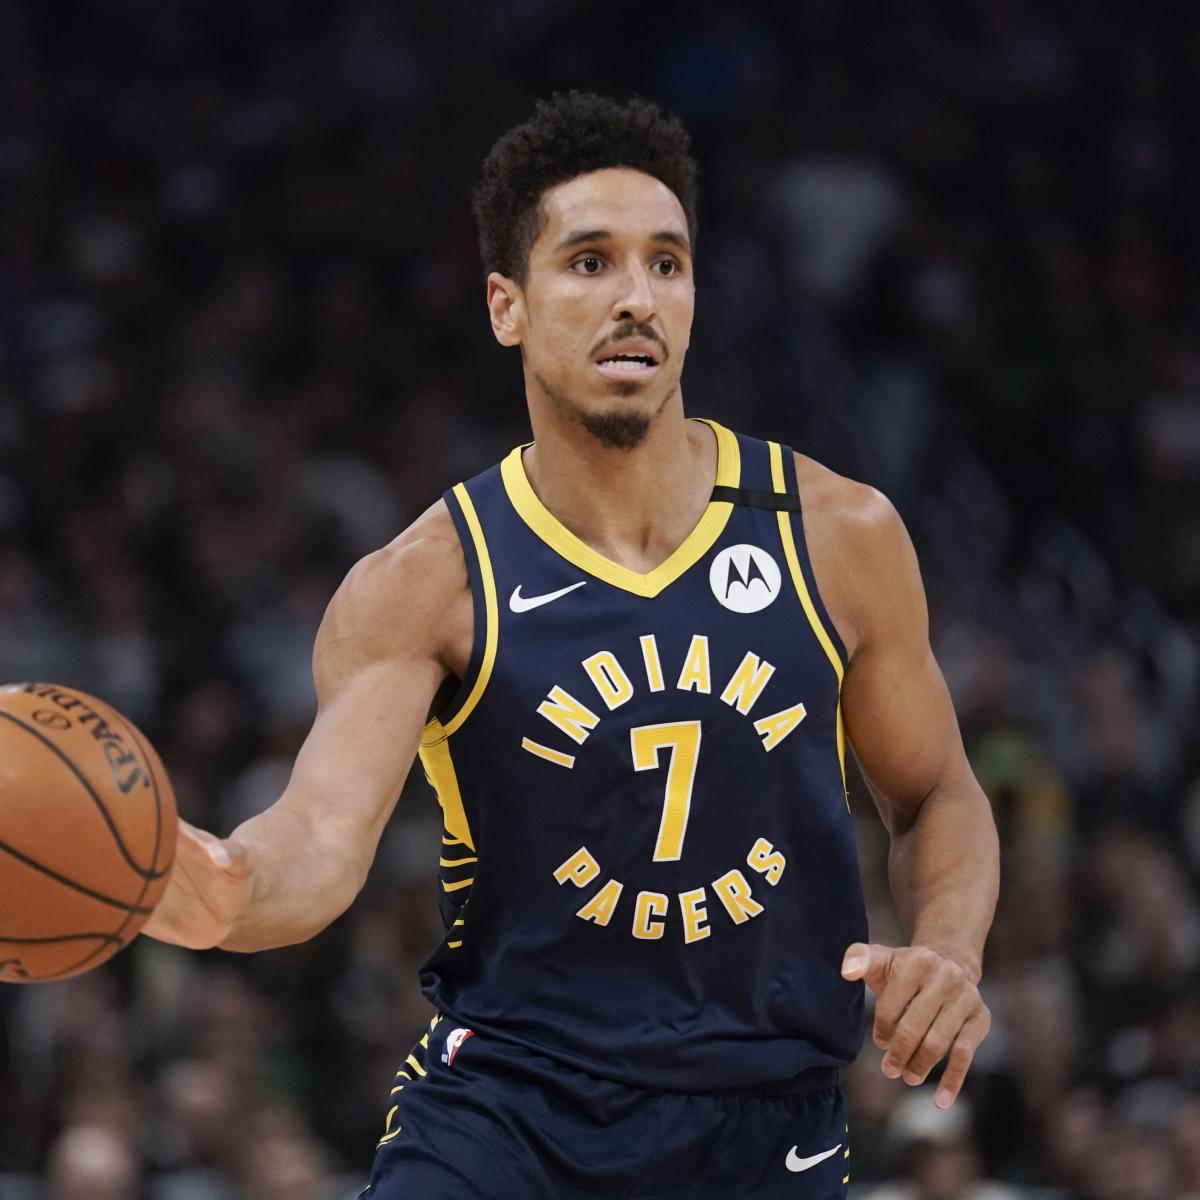 Malcolm Brogdon reflects on MLK's impact and his family's connection to  HBCUs